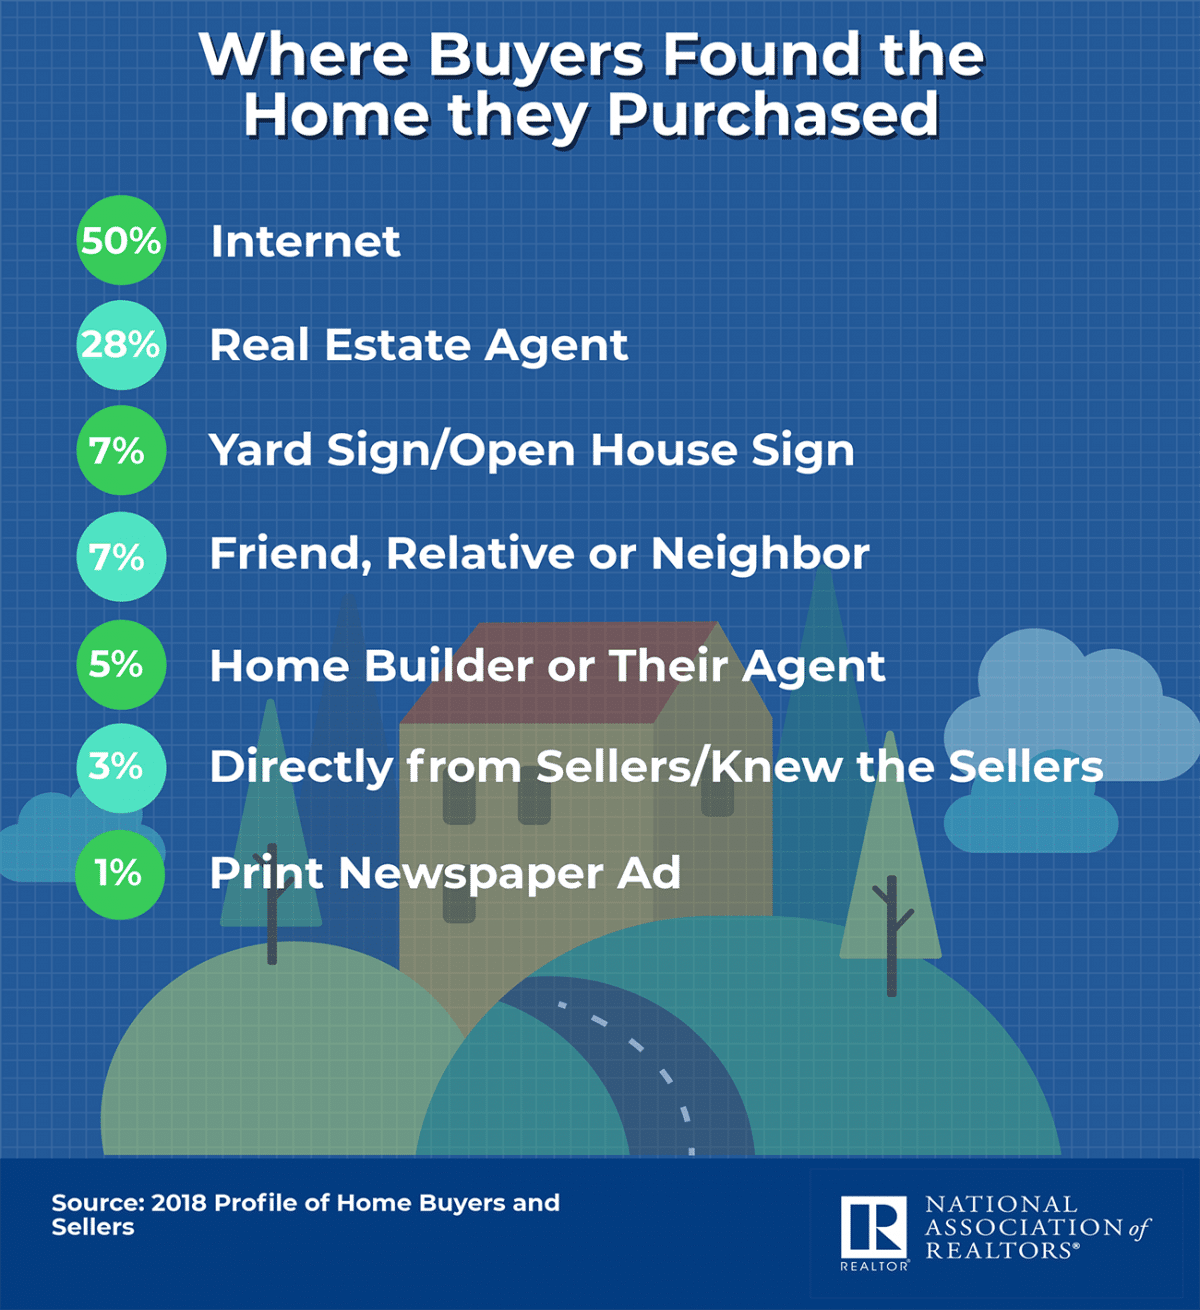 Where buyers found the home they purchased